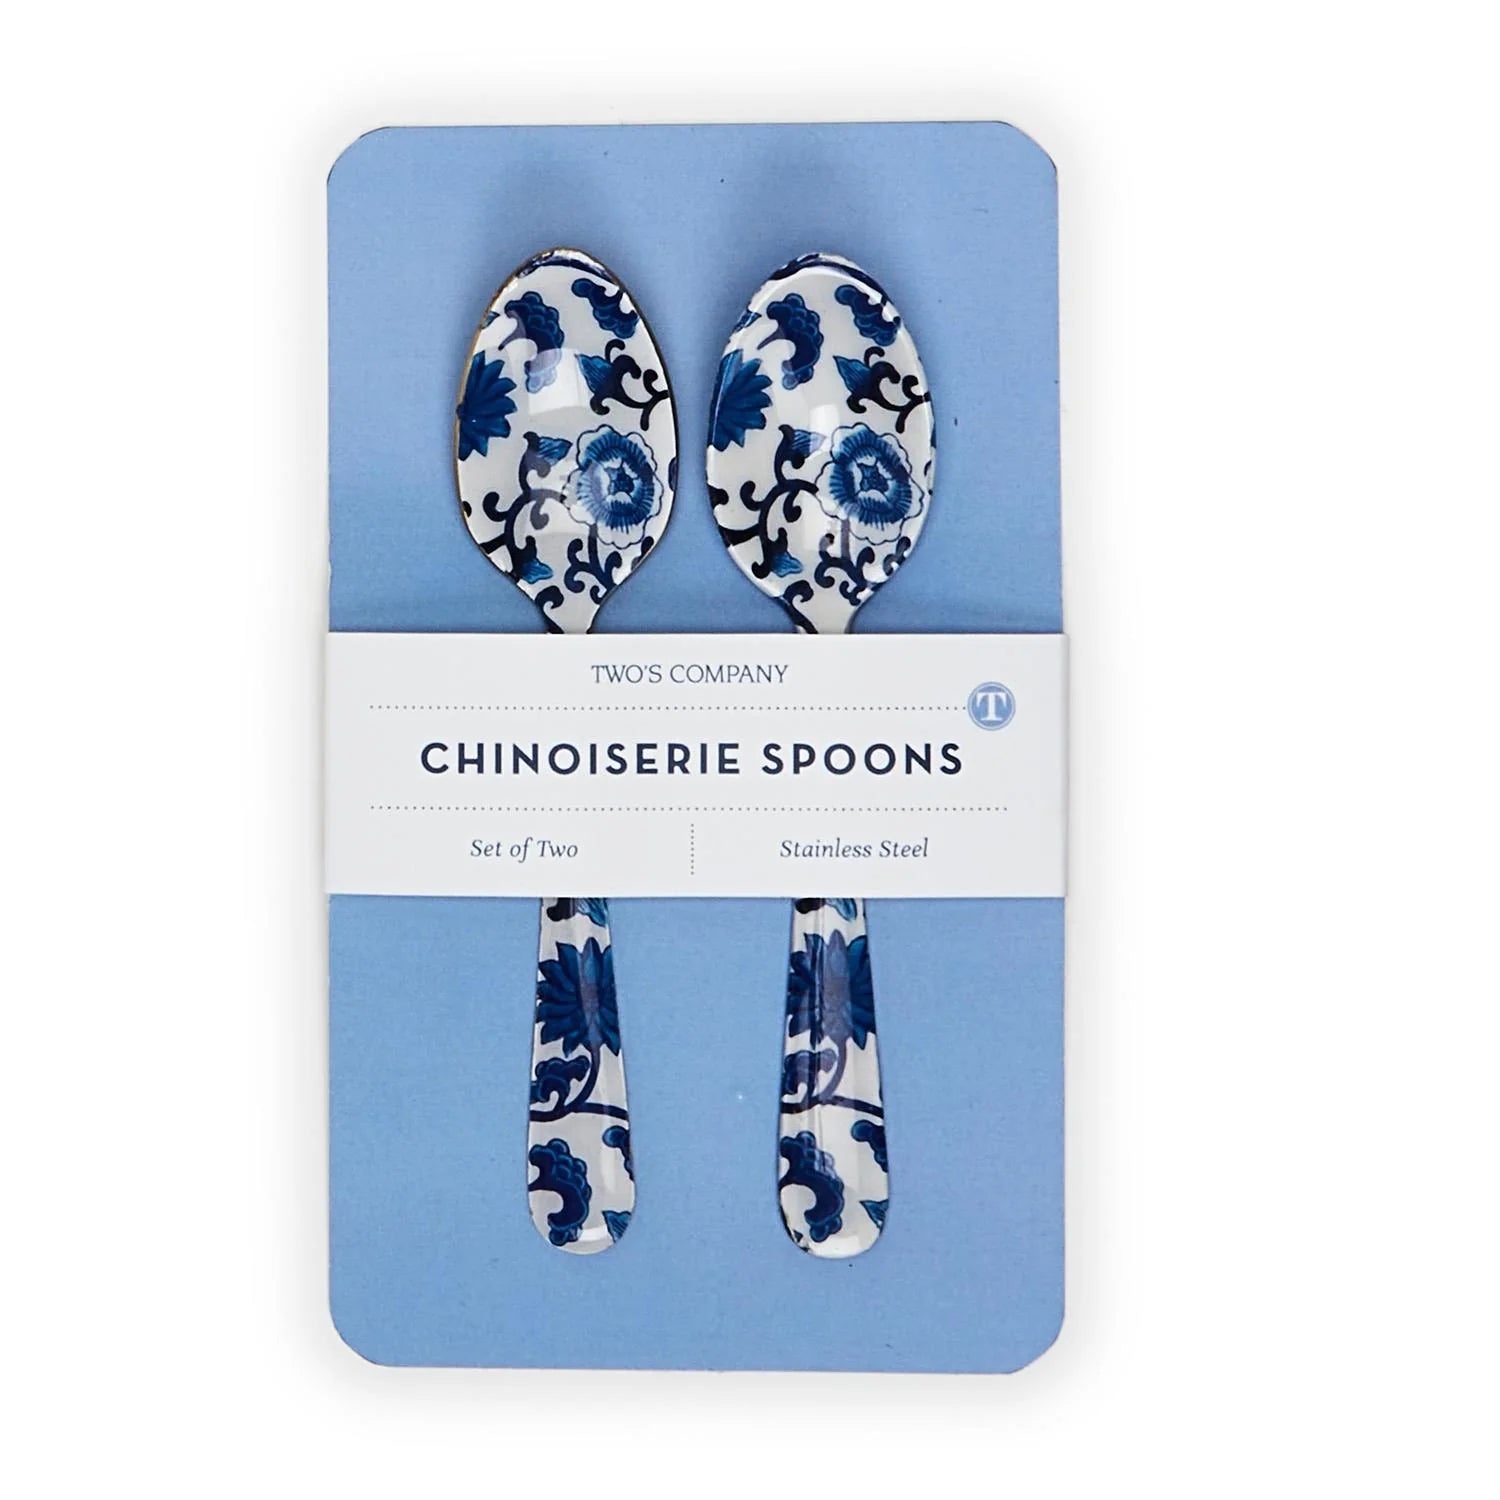 Chinoiserie Spoons on Gift Card - Set of 2